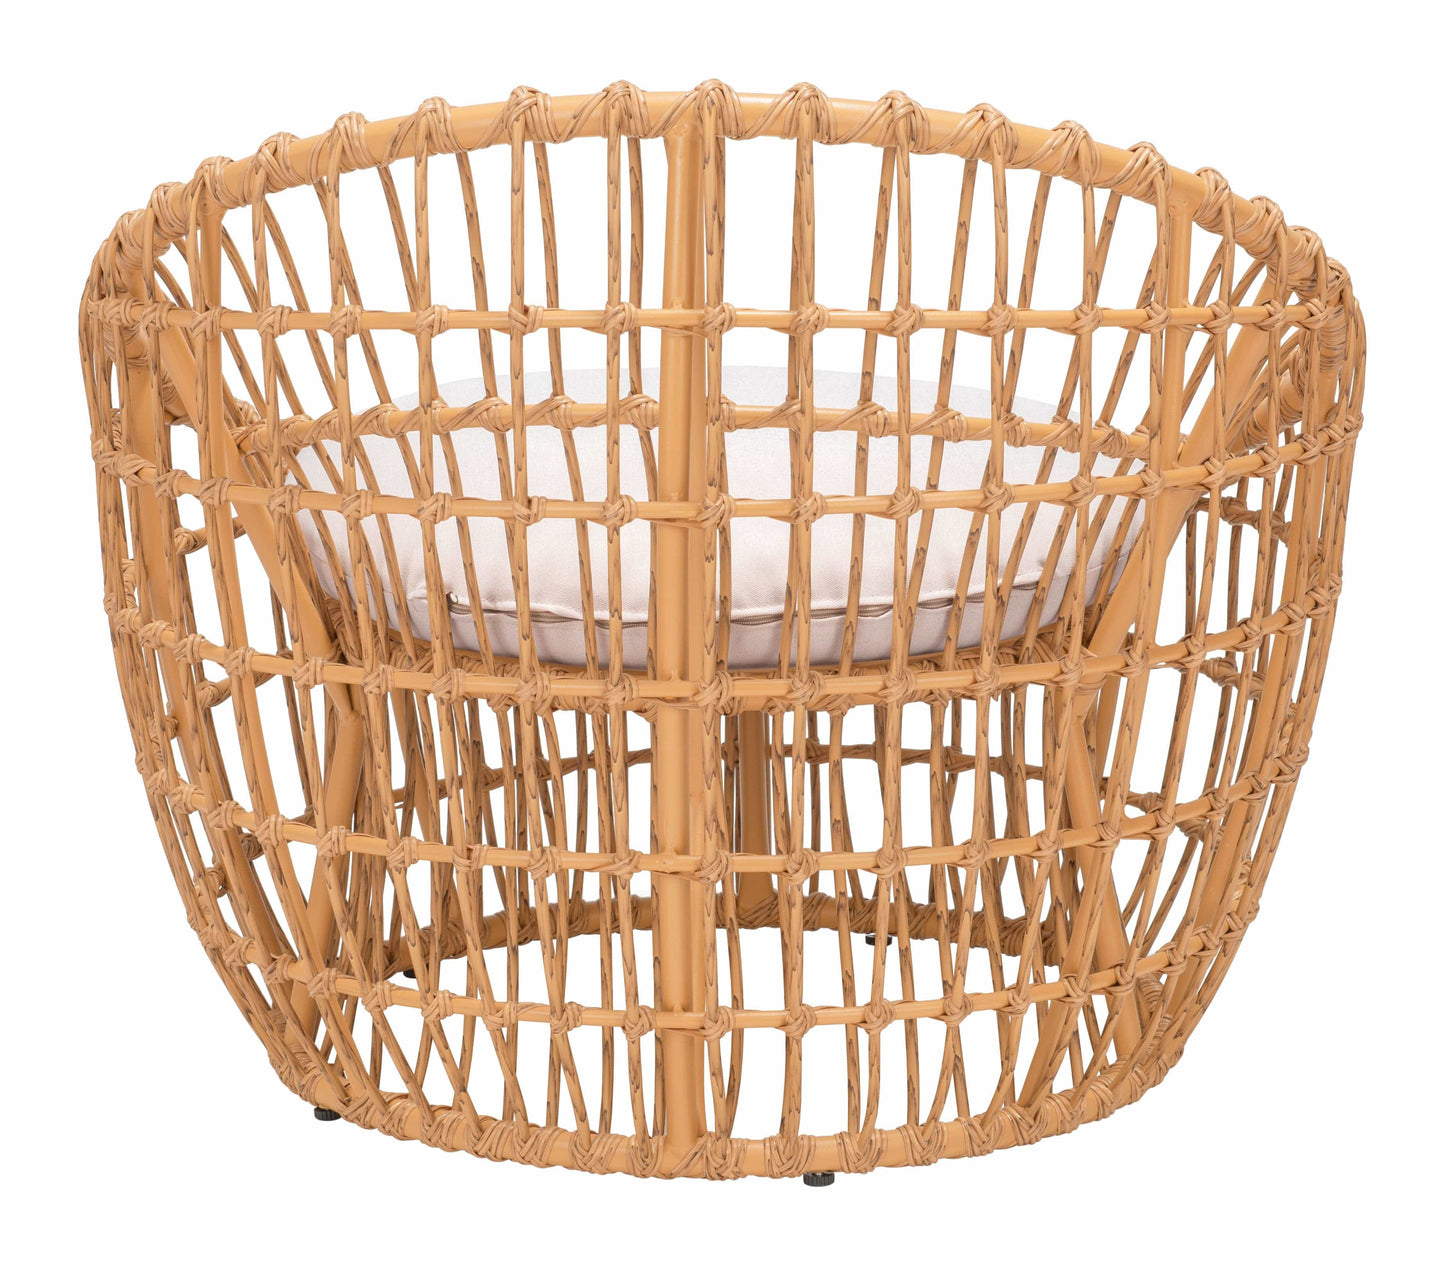 Back View - Synthetic Rattan Weave Polyethylene Matierals